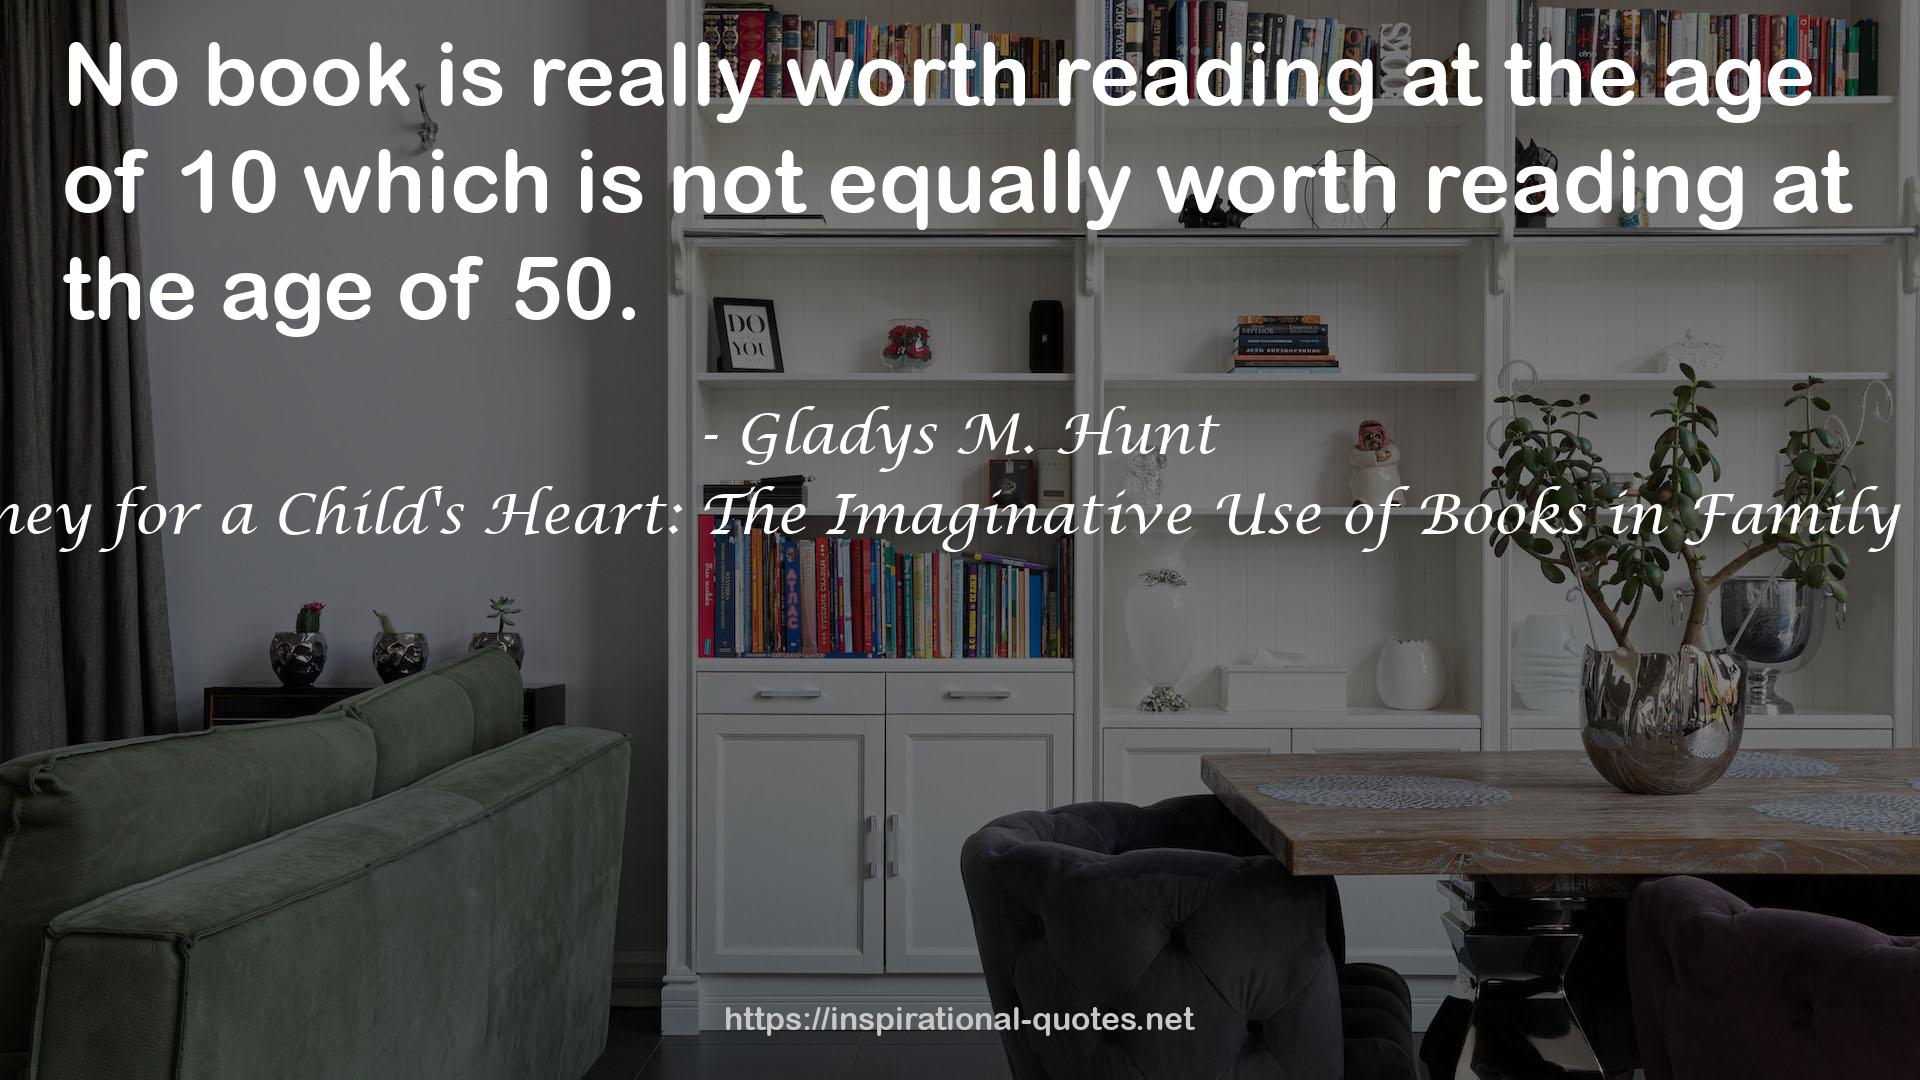 Honey for a Child's Heart: The Imaginative Use of Books in Family Life QUOTES